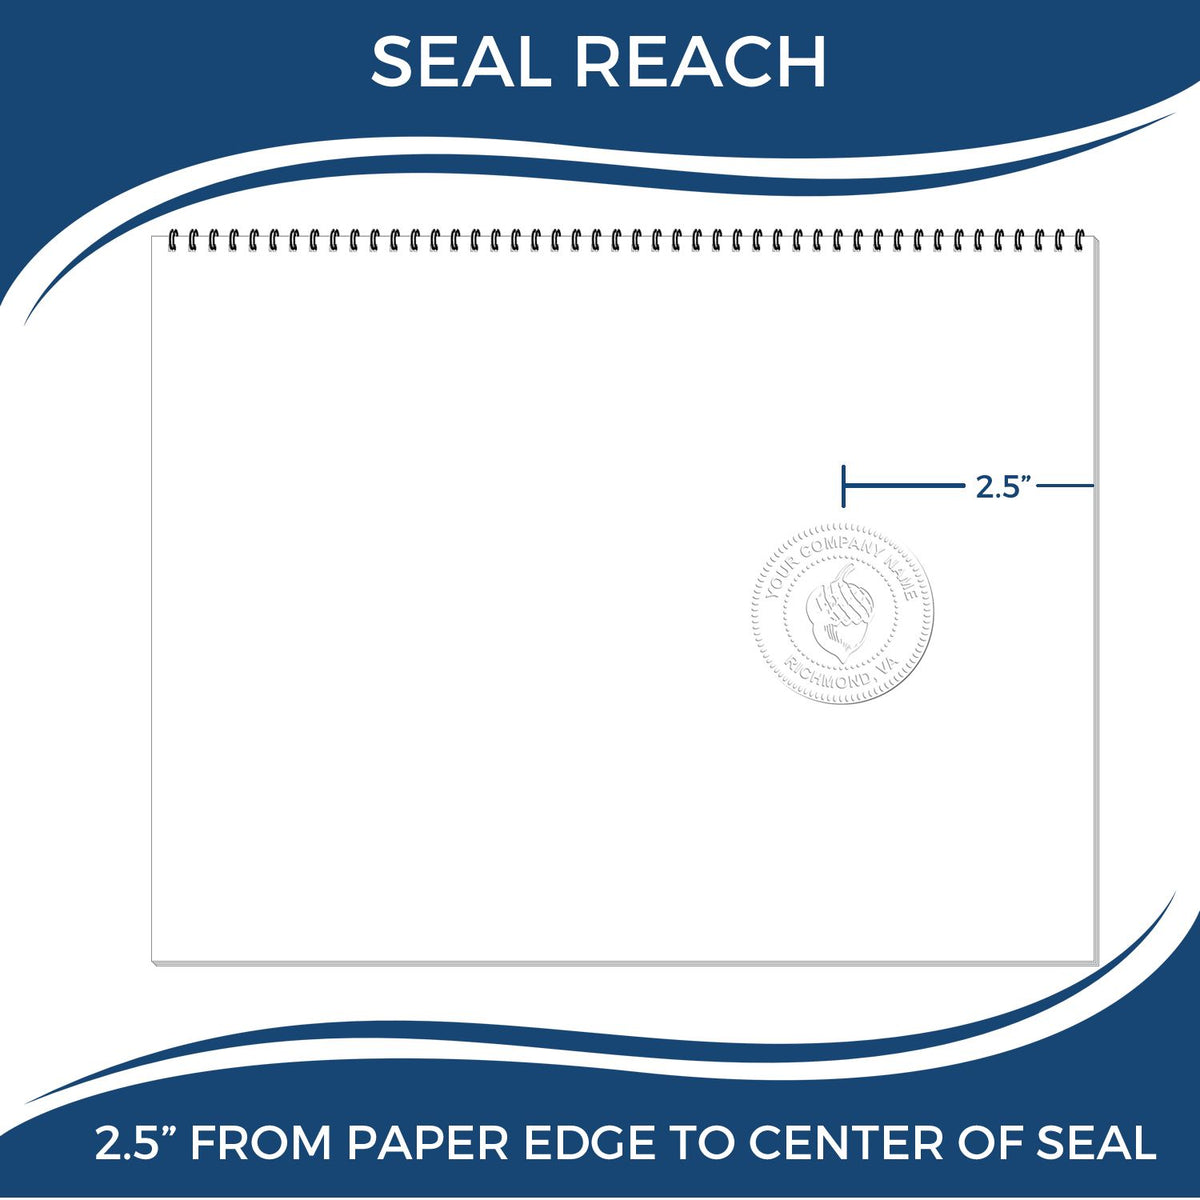 An infographic showing the seal reach which is represented by a ruler and a miniature seal image of the Long Reach Connecticut PE Seal